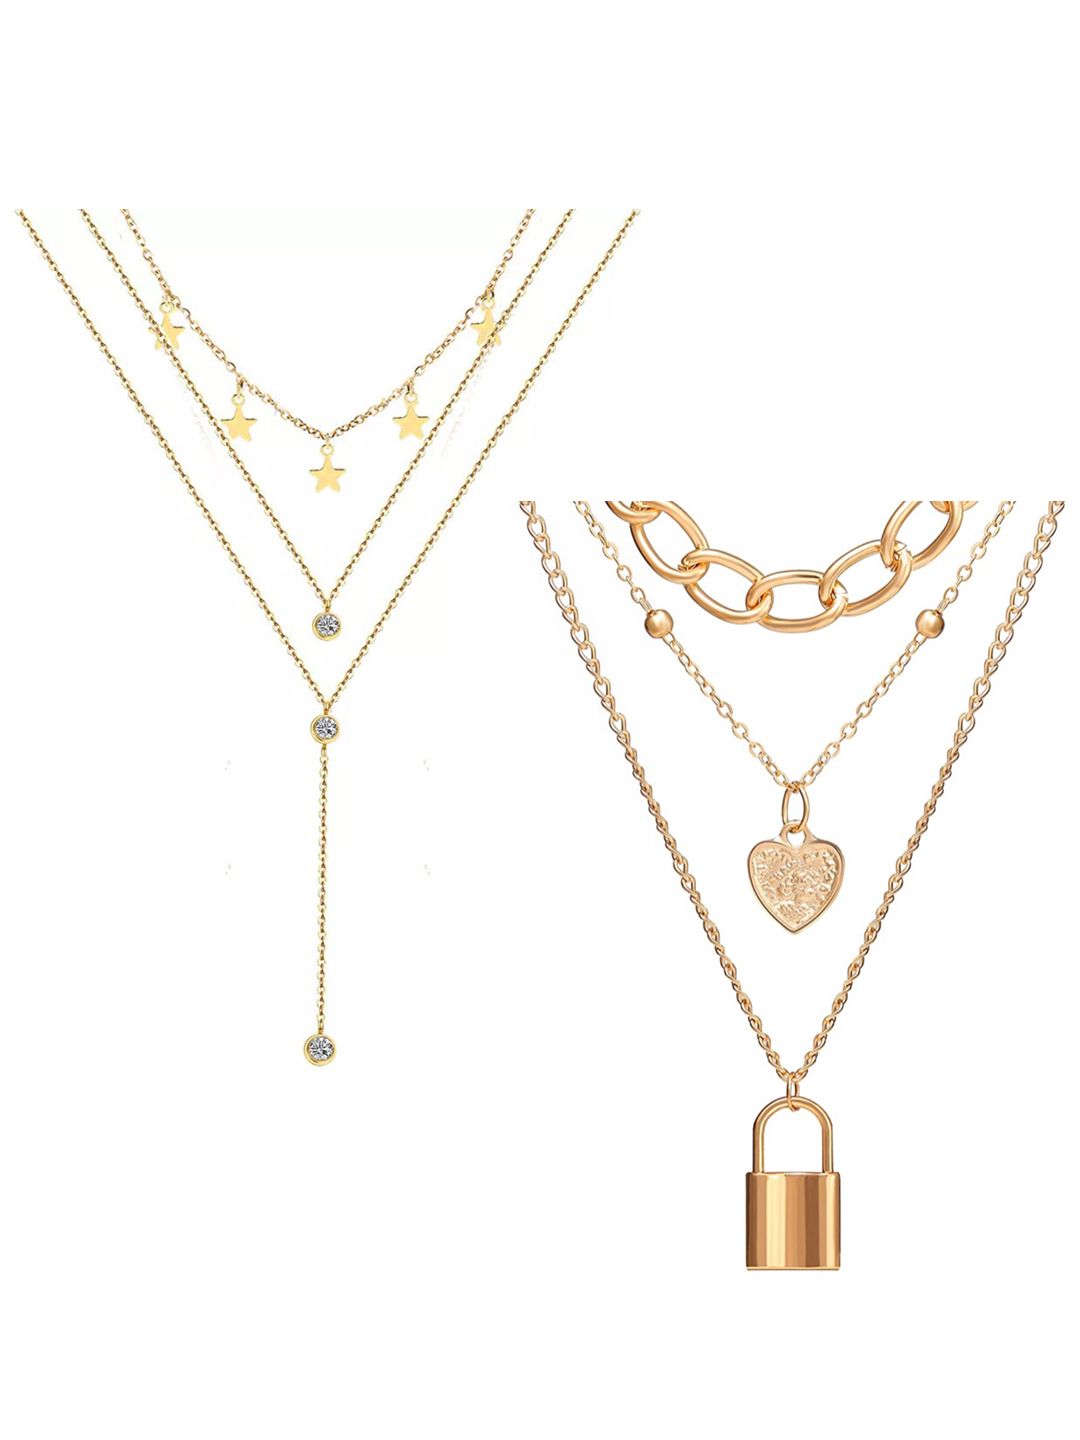 Vembley Set of 2 Gold-Plated & White Layered Necklace Price in India